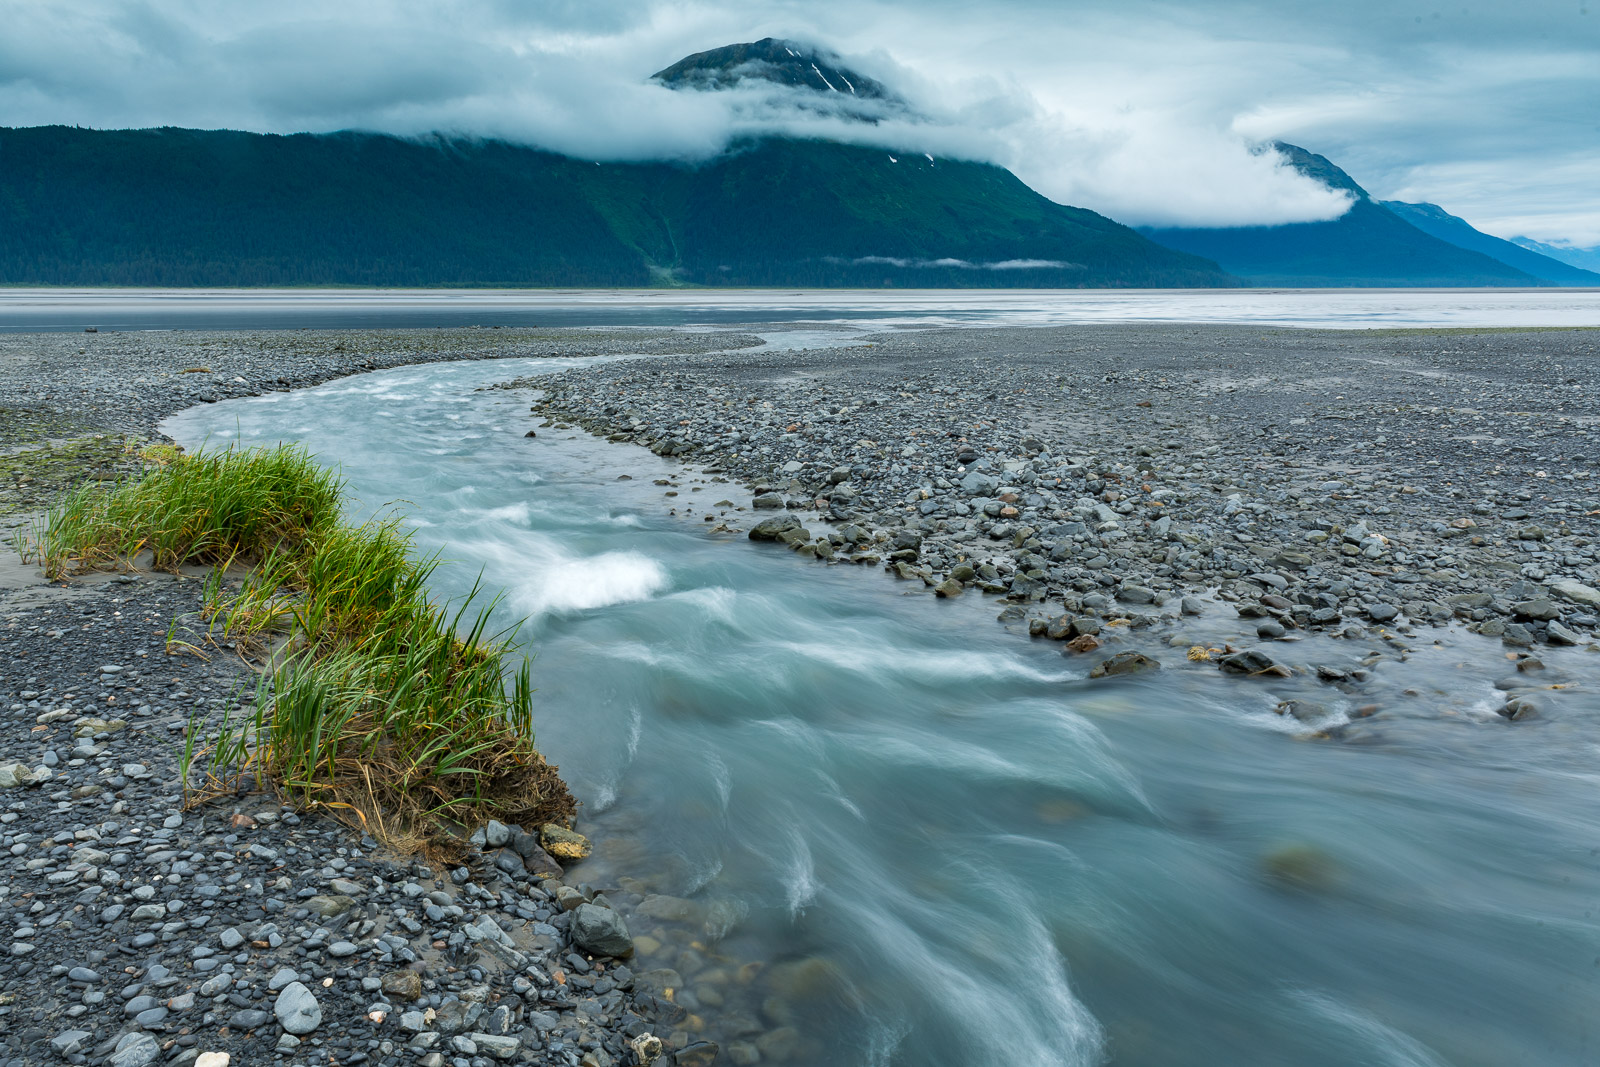 The outflow of Peterson Creek on the Turnagain Arm spills out through a gravel bar.